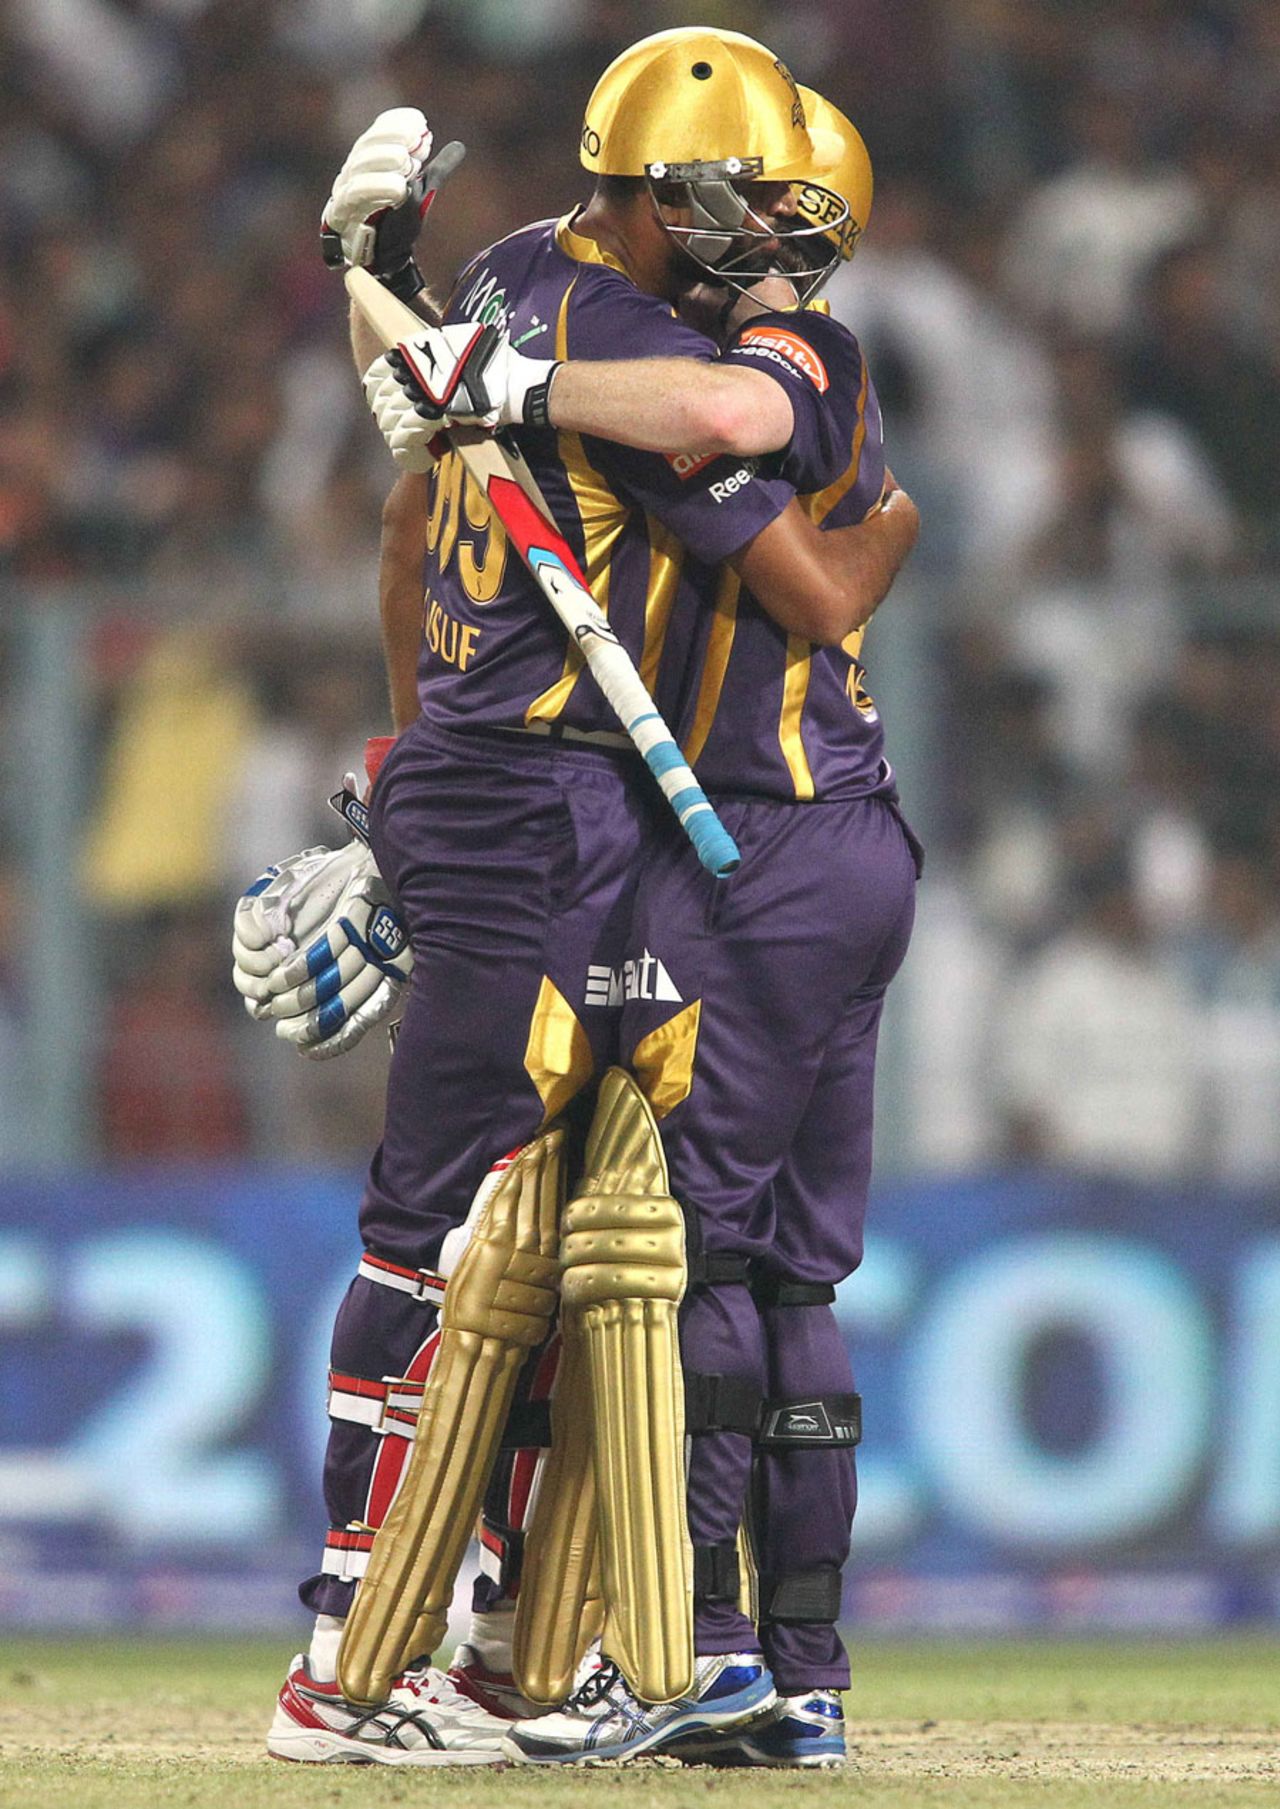 Yusuf Pathan and Eoin Morgan embrace one another after leading Kolkata Knight Riders to victory, Kolkata Knight Riders v Delhi Daredevils, IPL, Kolkata, April 3, 2013